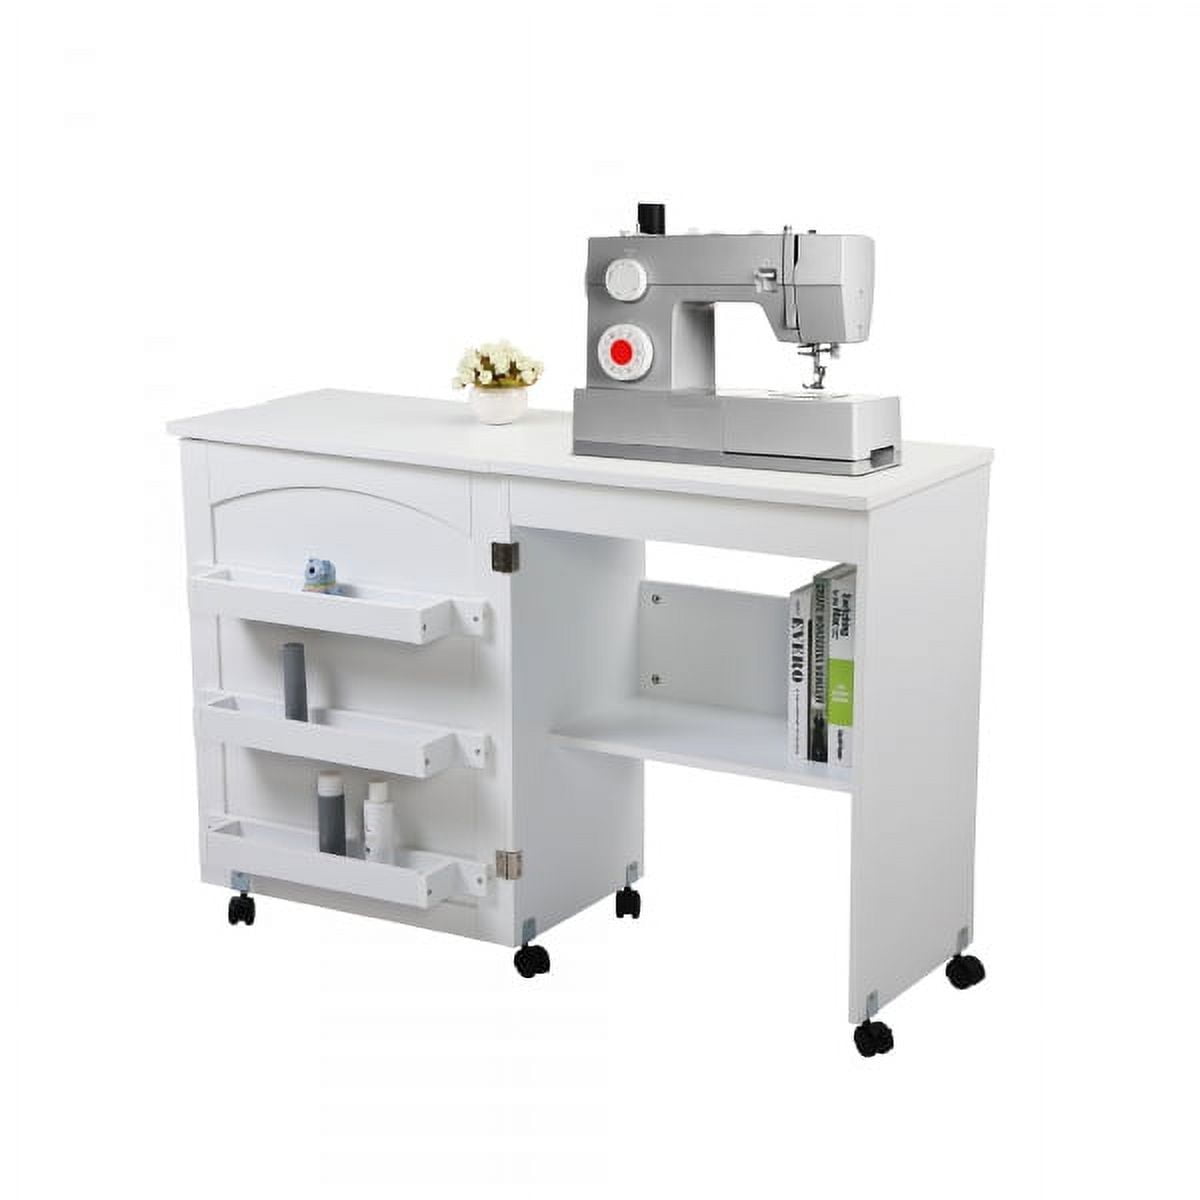 Usinso Folding Sewing Table Multifunctional Sewing Machine Cart Table Sewing Craft Cabinet Table with Storage Shelves Portable Rolling Sewing Desk